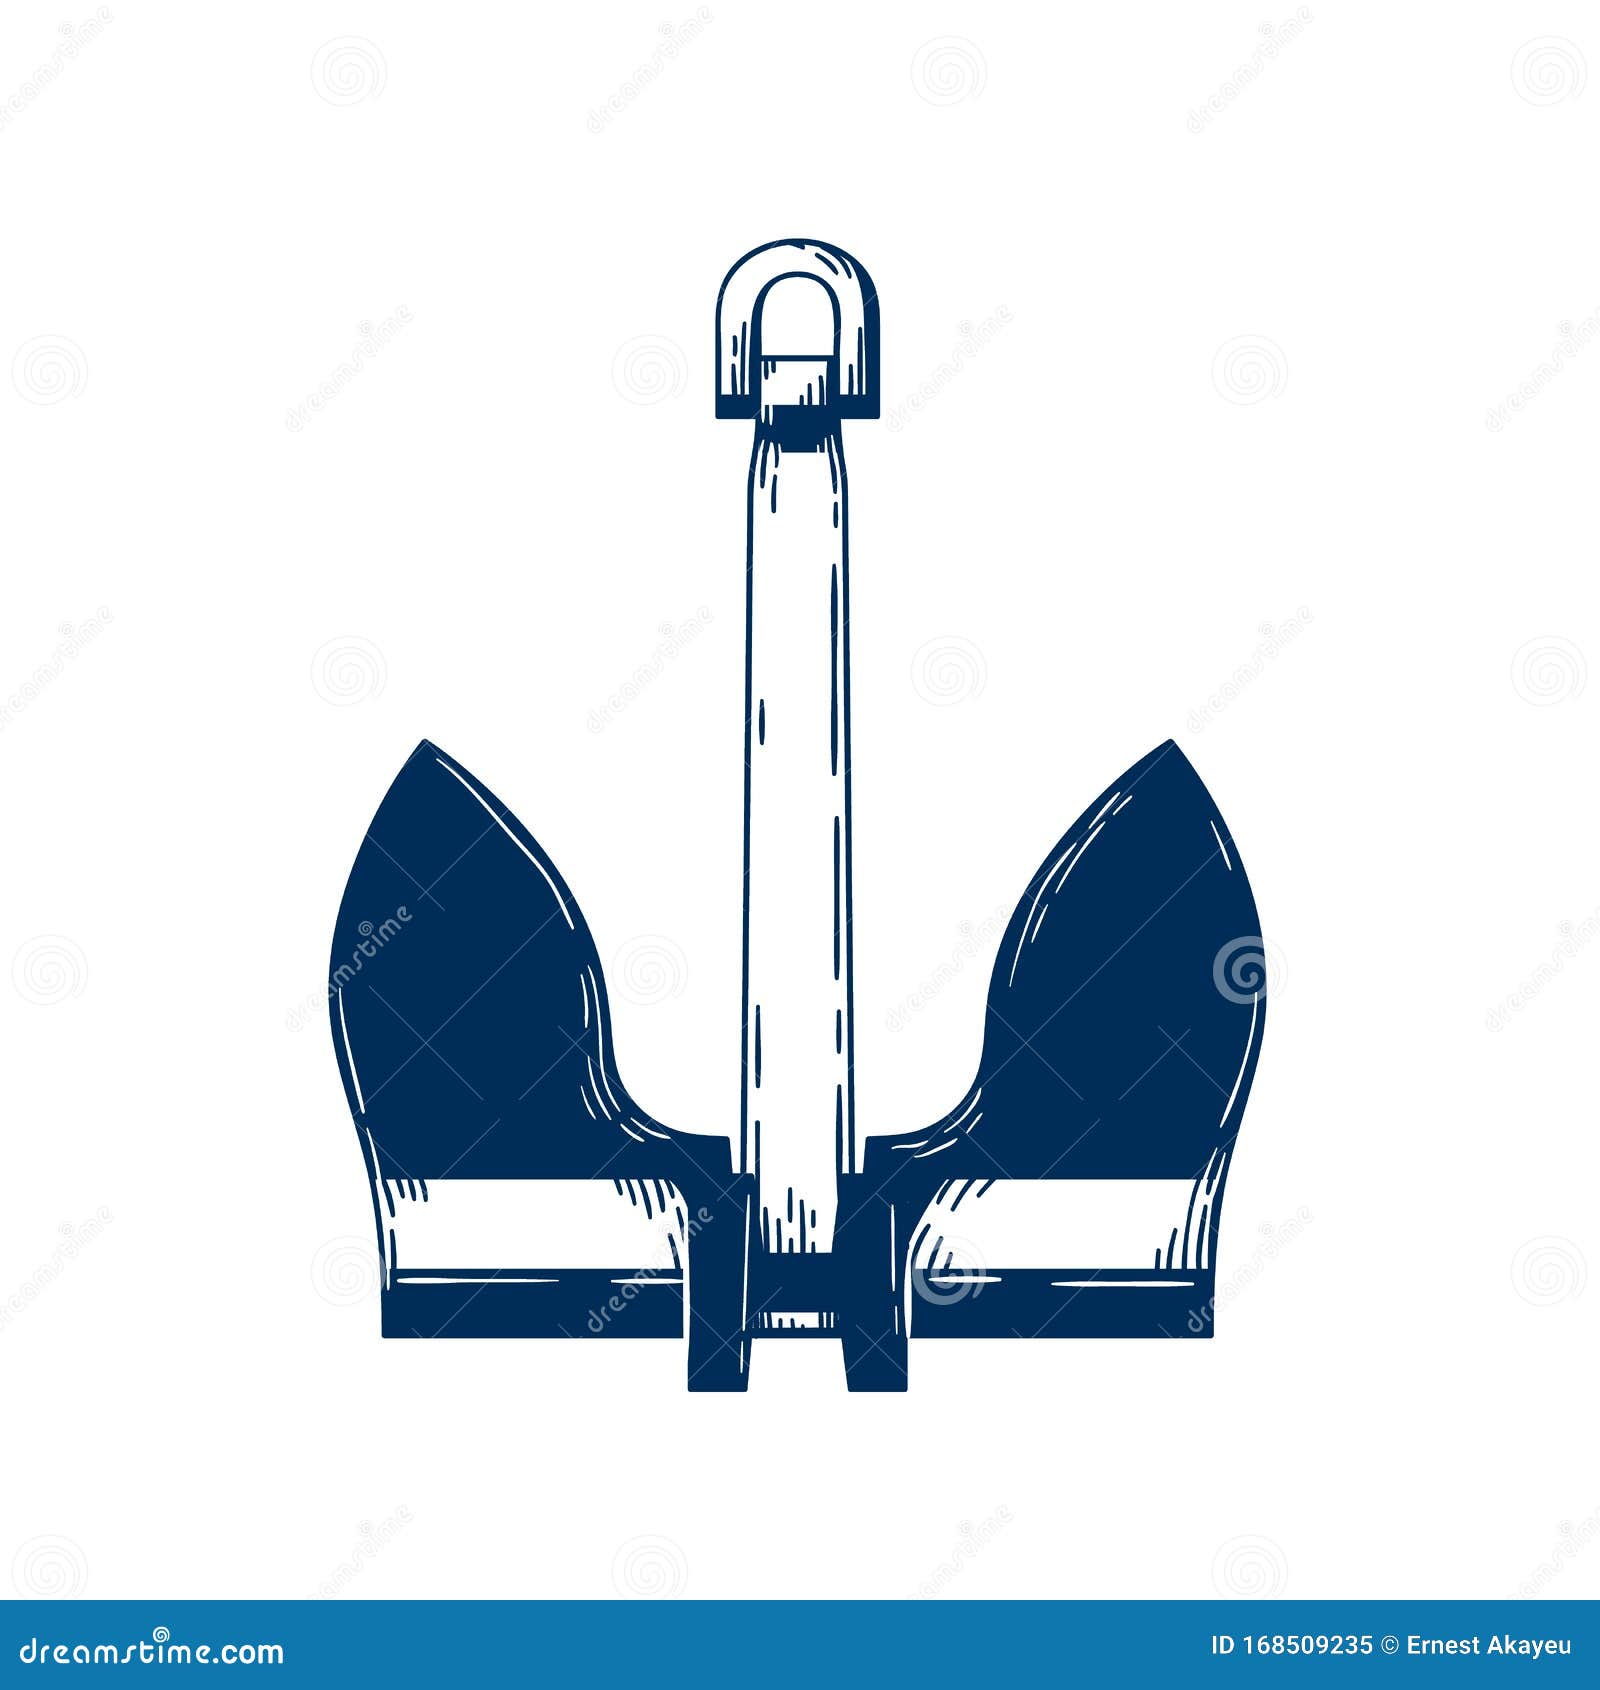 45 Stockless Anchor Images, Stock Photos, 3D objects, & Vectors |  Shutterstock